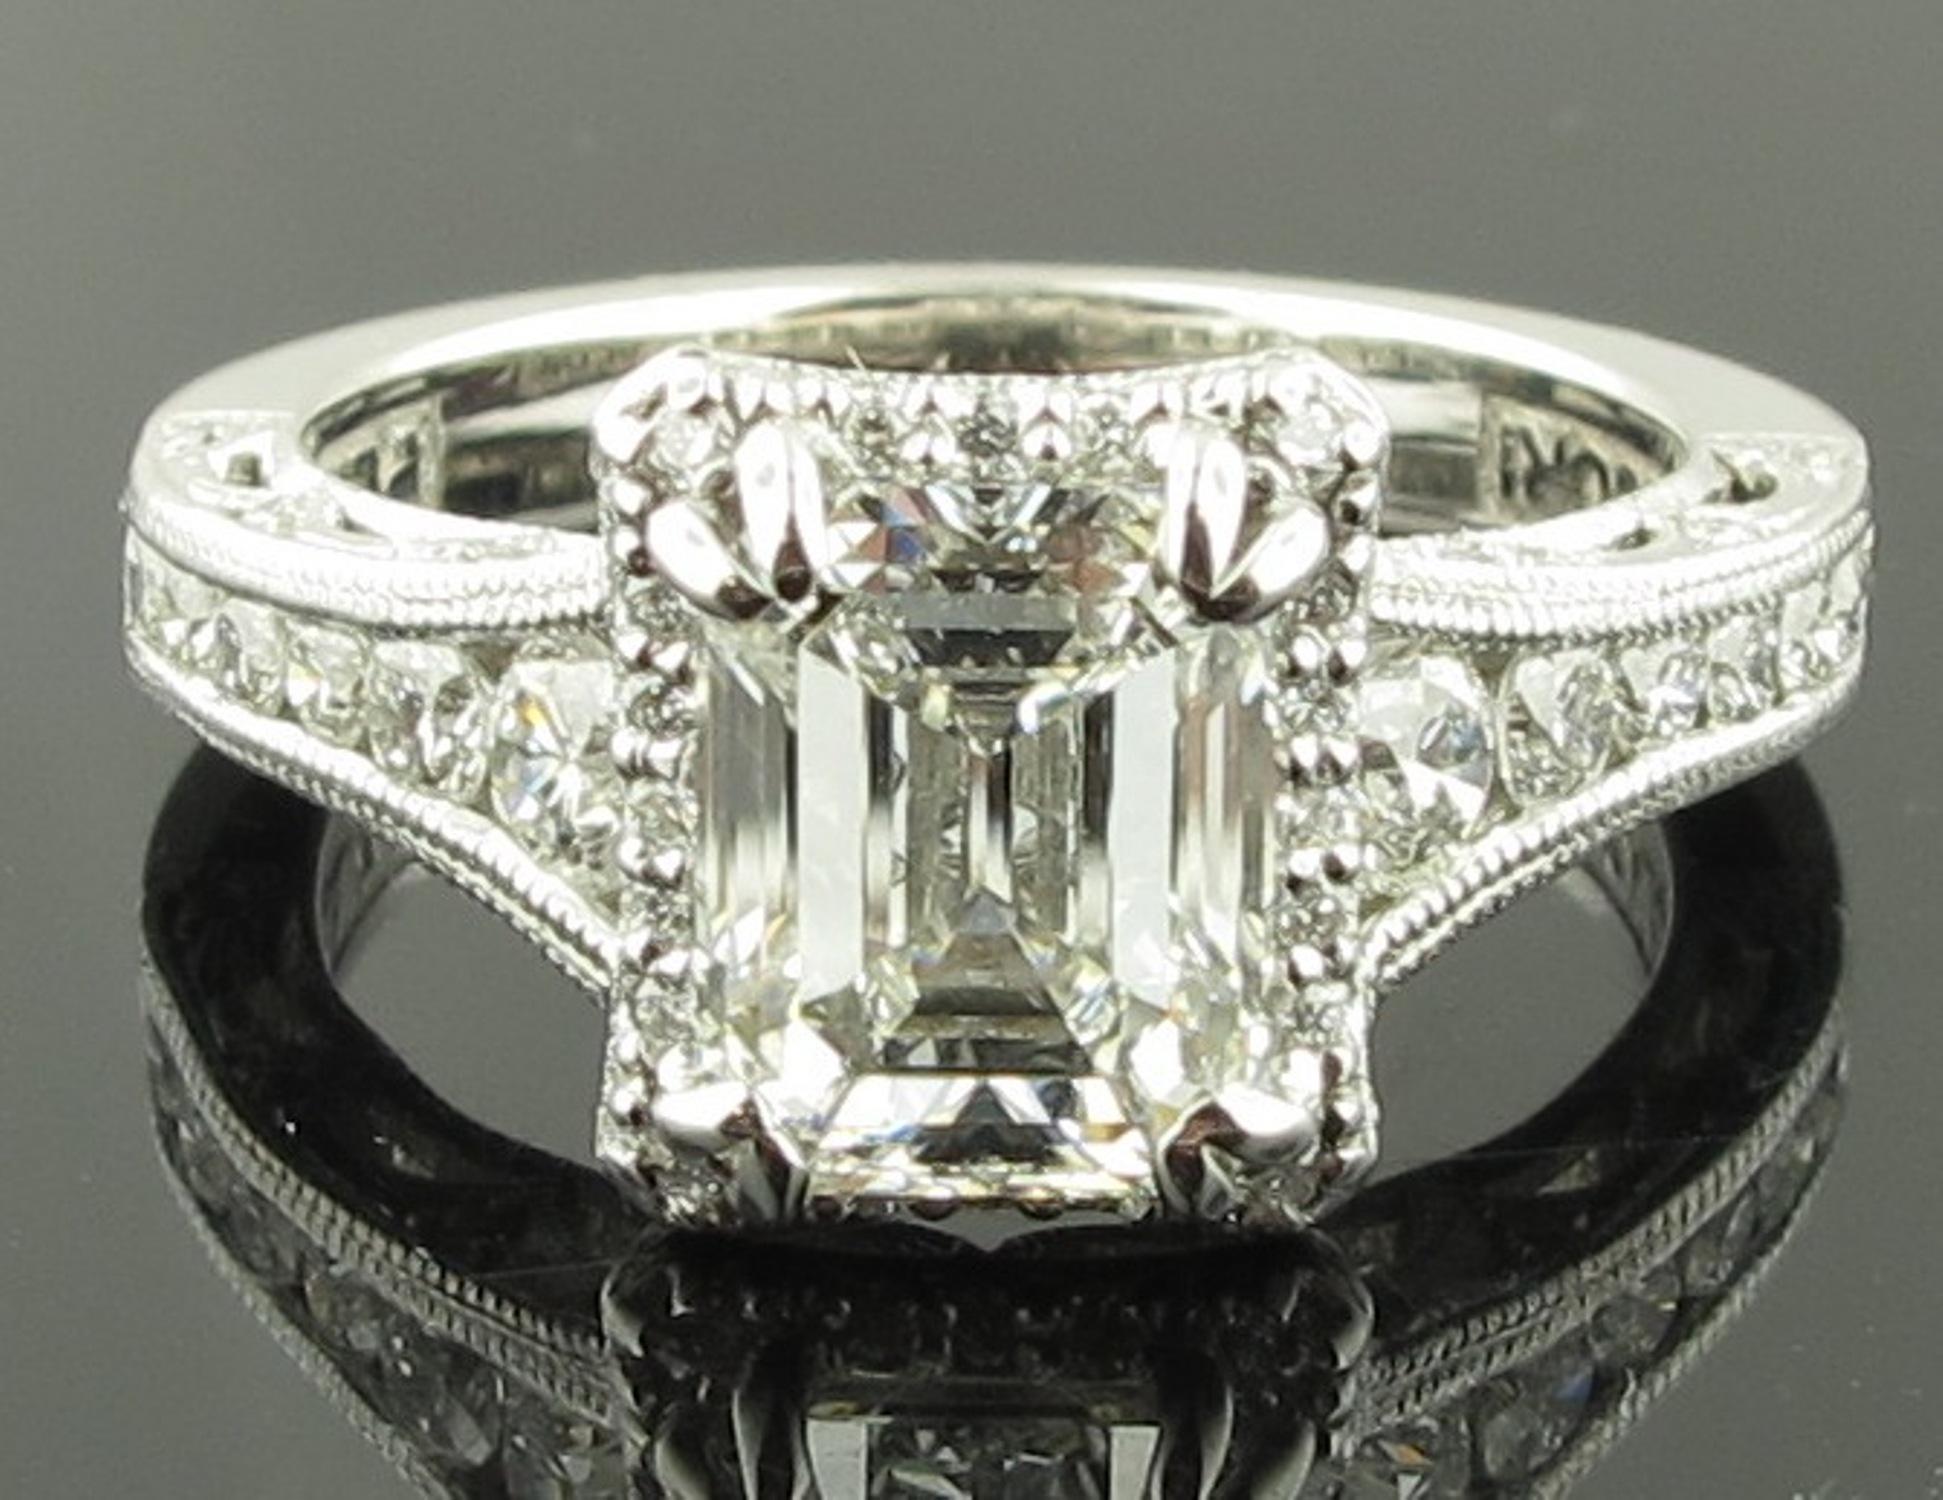 18 karat white gold Tacori Plat mounting with a 2.02 carat Emerald Cut diamond ring, GIA certified, F color, VS-1 clarity.  The mounting includes 48 round brilliant diamonds weighing 0.84 carats, E-F color, VVS clarity. Ring size: 6.25.